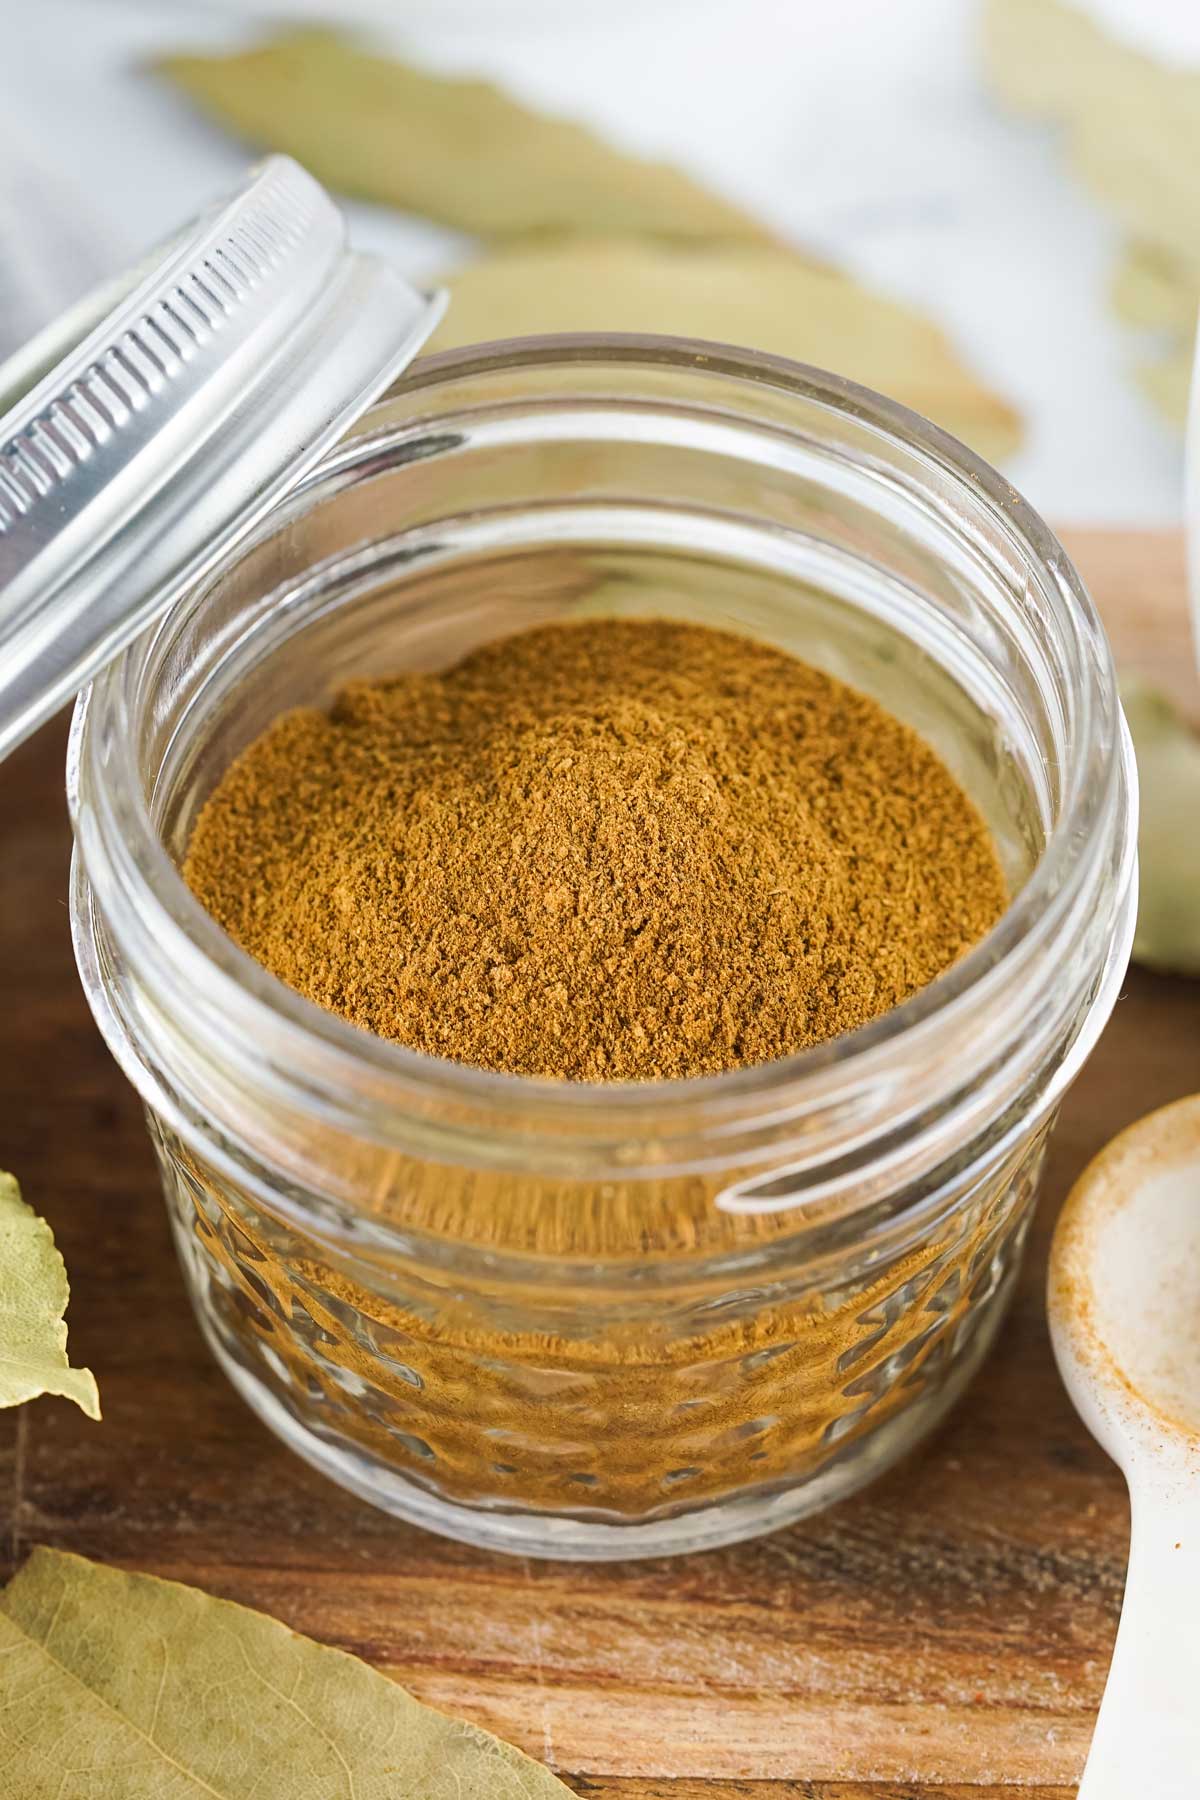 A small jar of Pumpkin Pie Spice with bay leaf on a wooden table